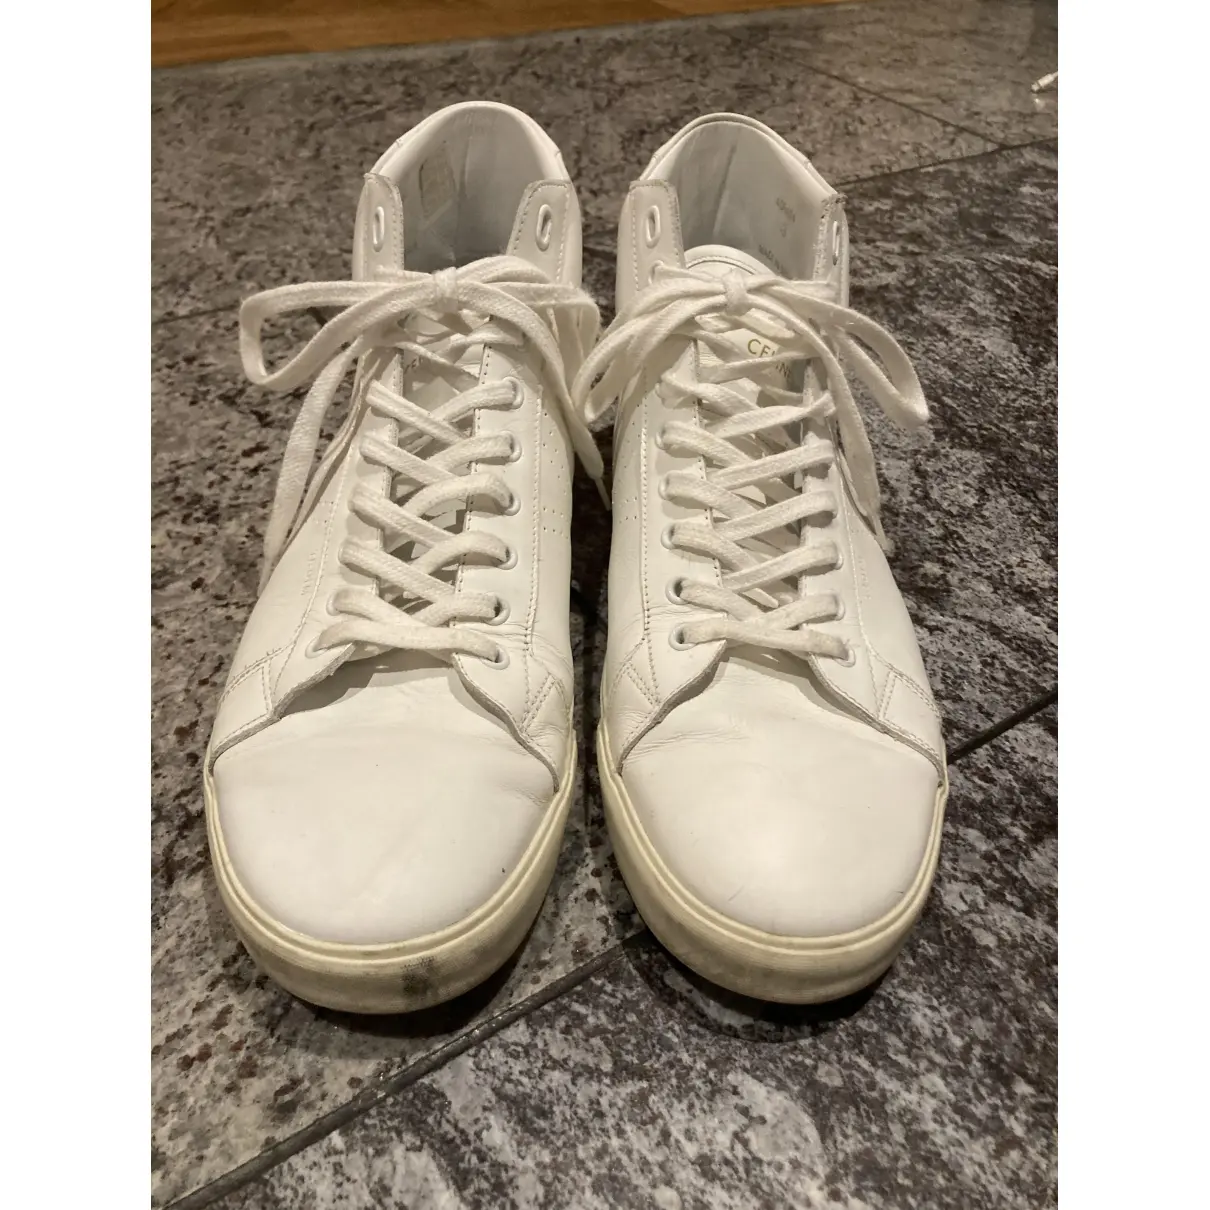 Buy Celine Triomphe leather high trainers online